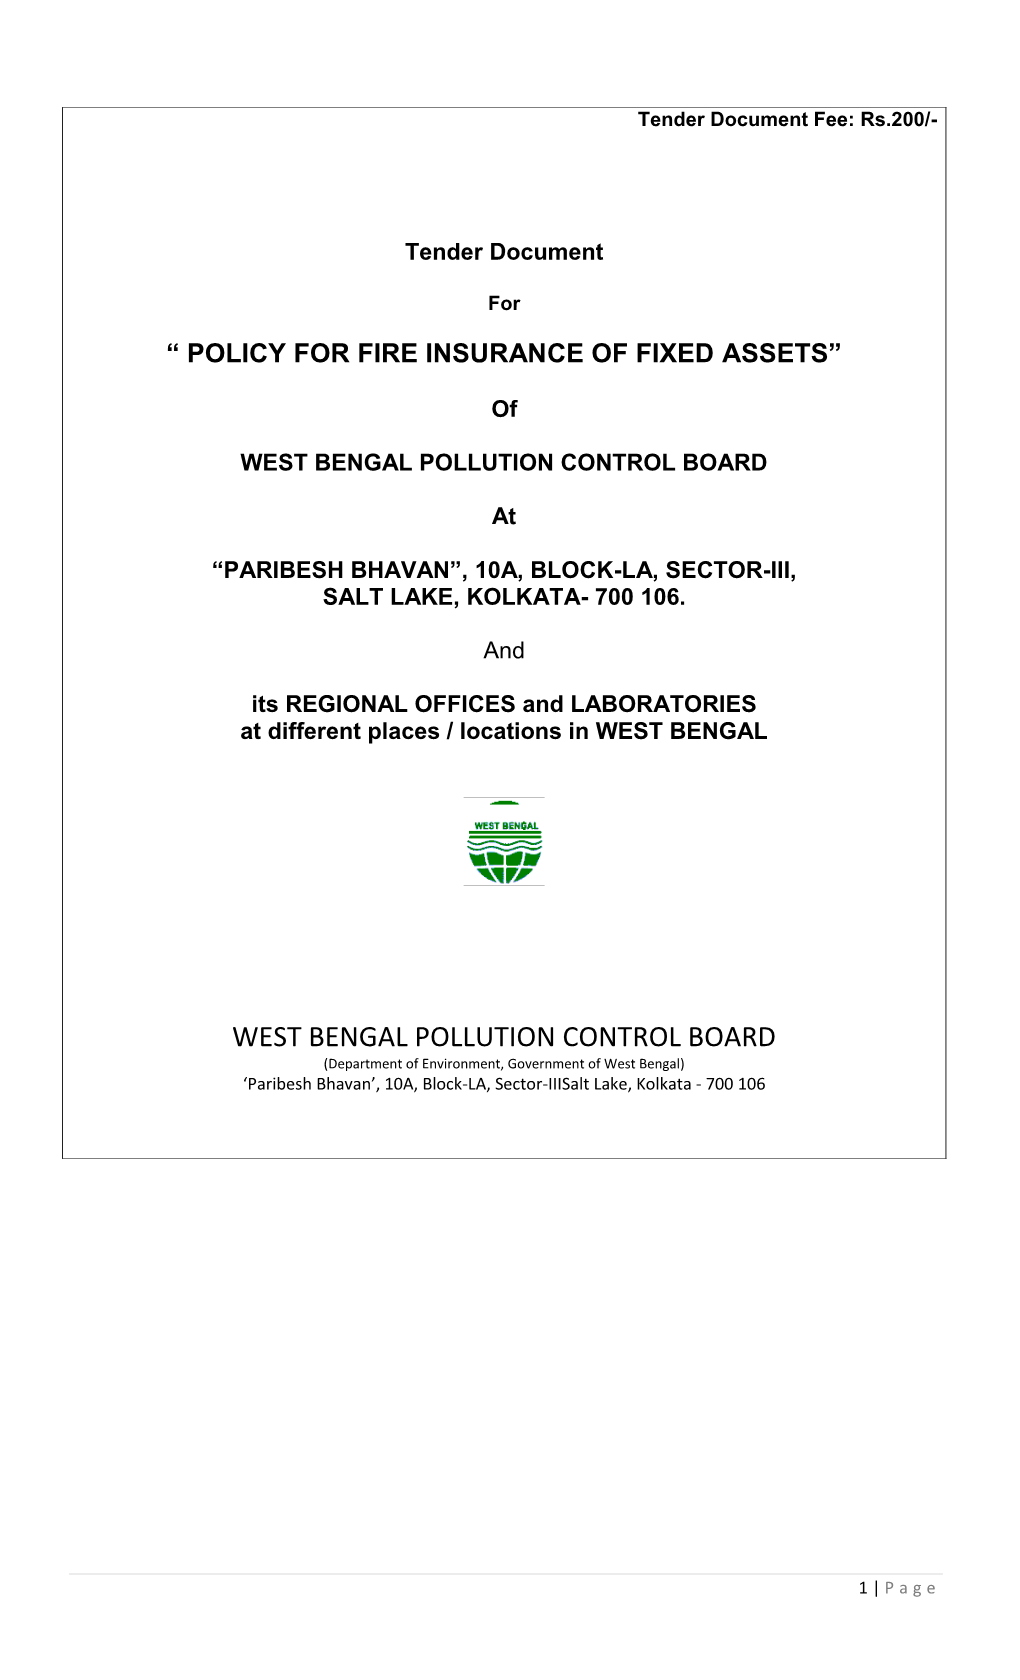 Policy for Fire Insurance of Fixed Assets”